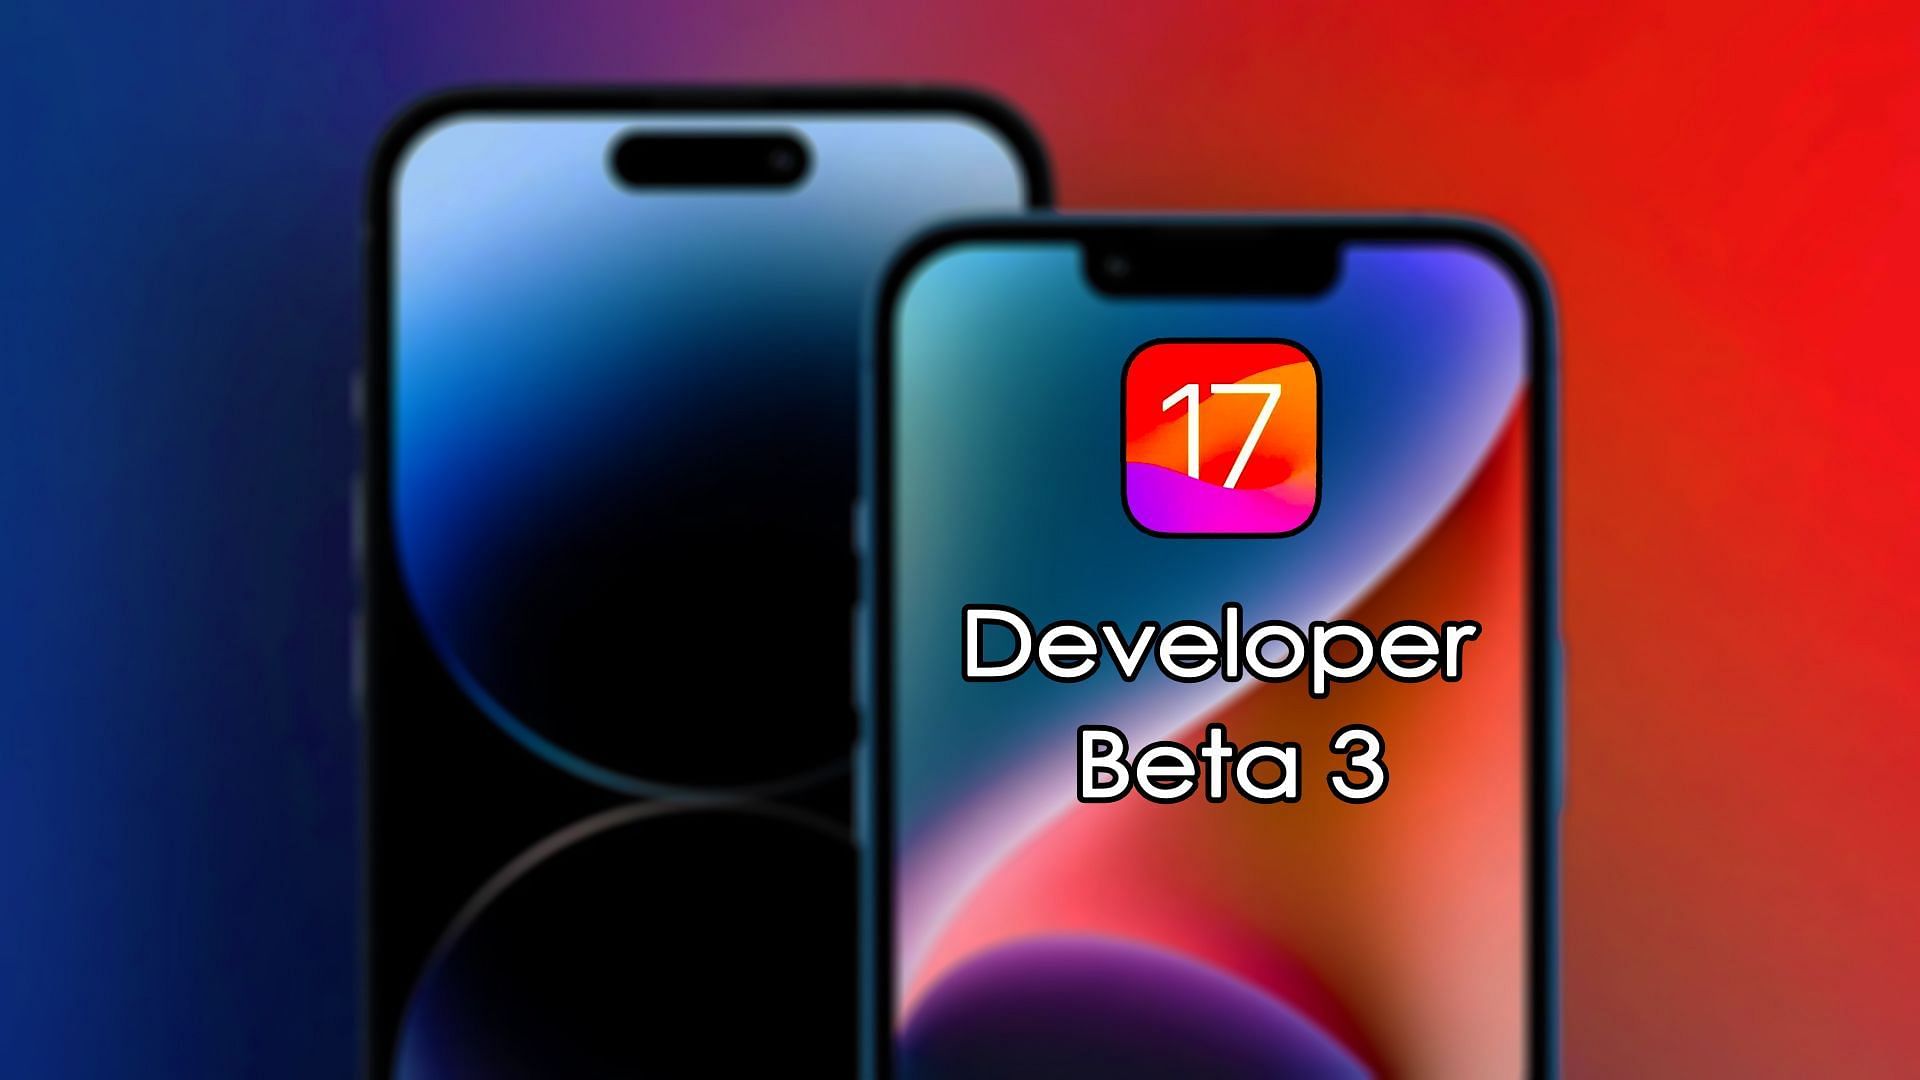 Details of the changes in iOS 17 dev beta 3